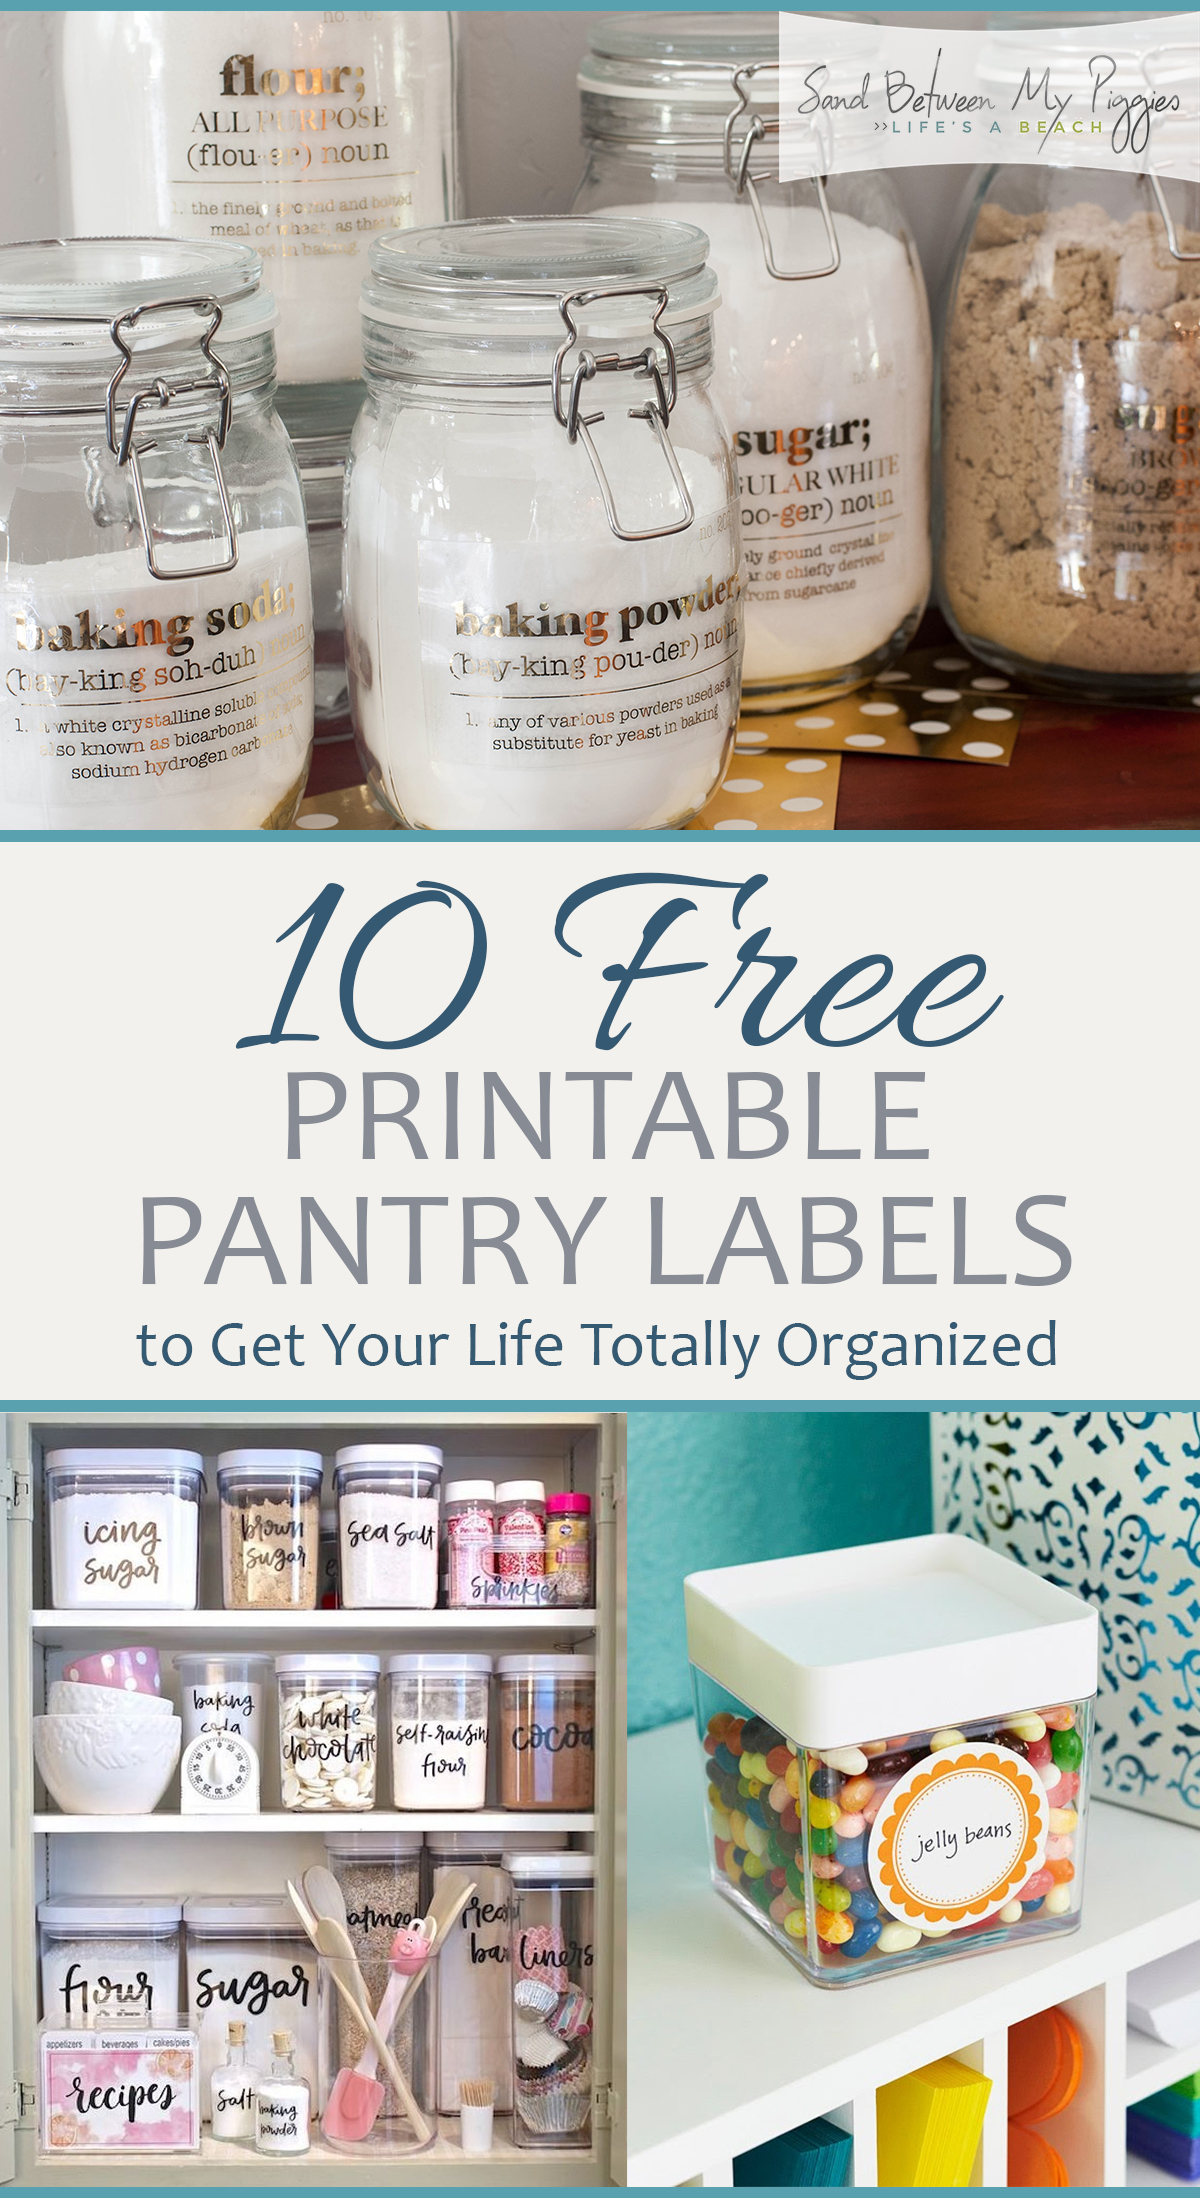 10-free-printable-pantry-labels-to-get-your-life-totally-organized